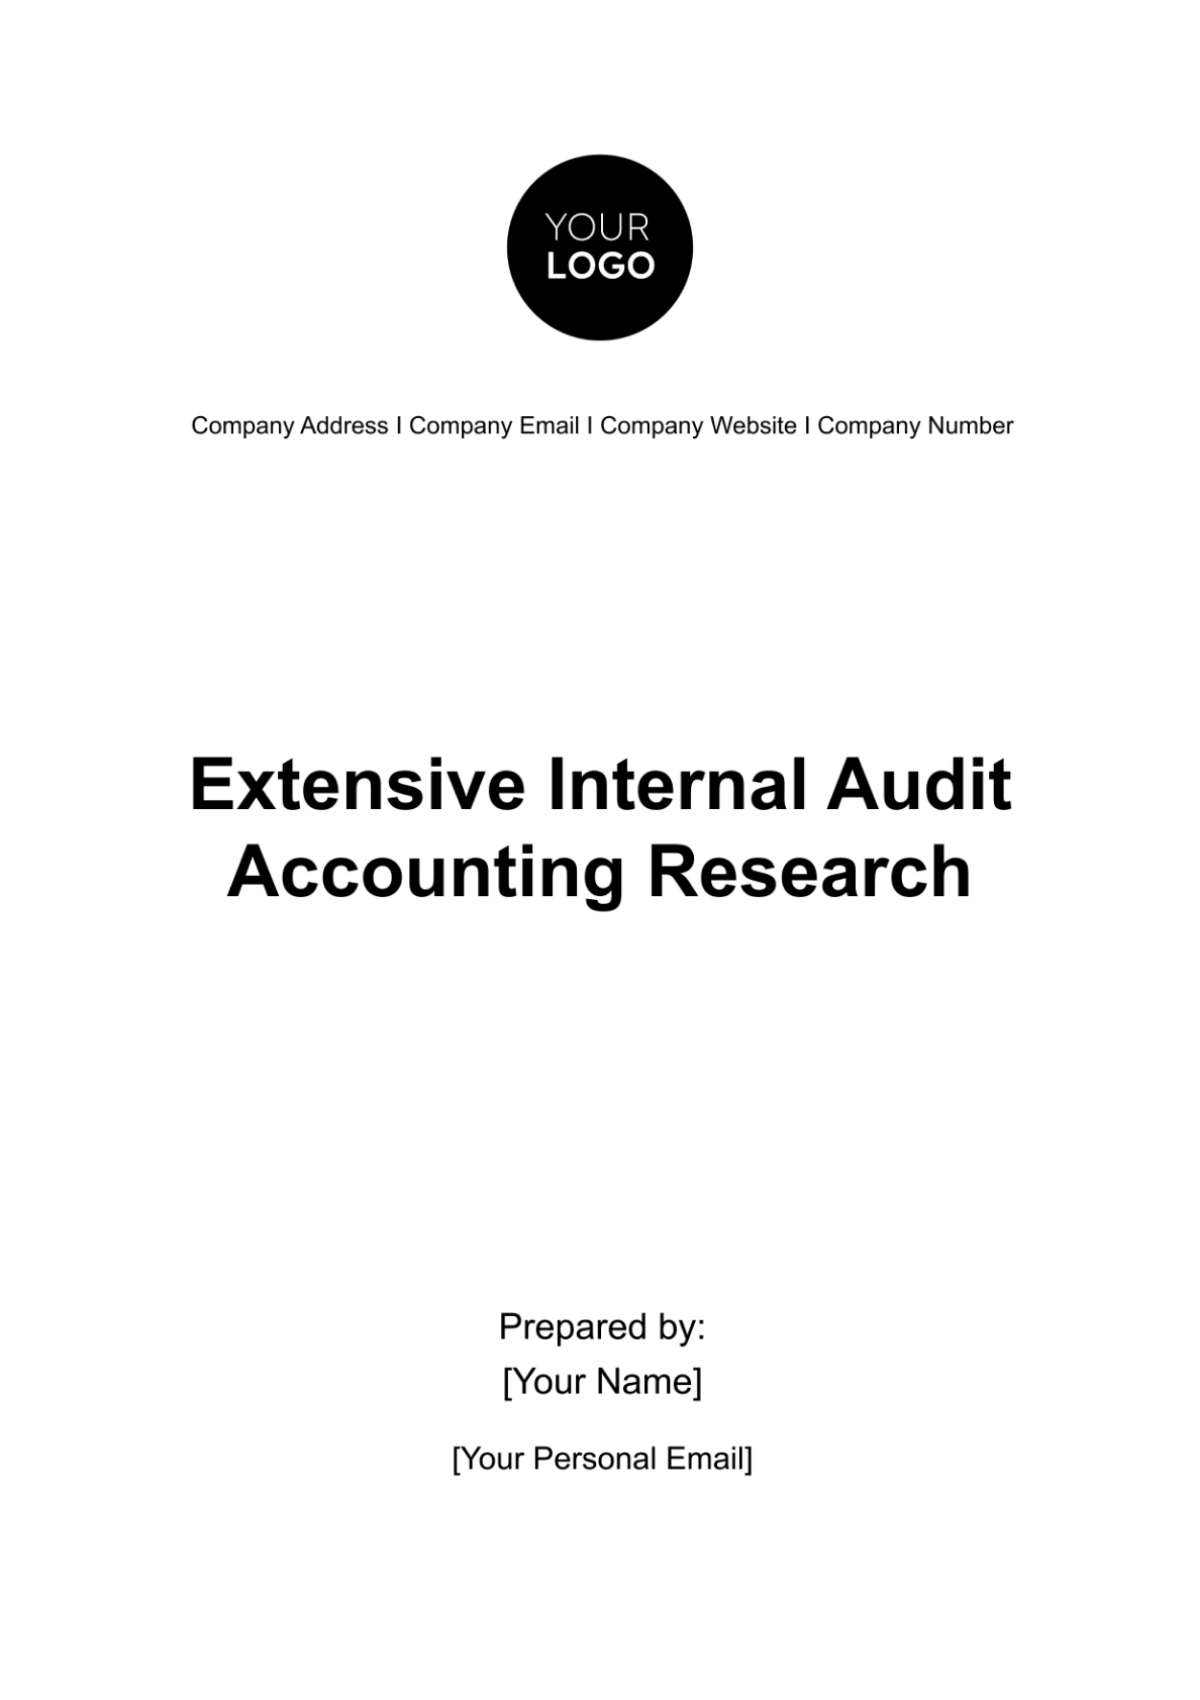 Extensive Internal Audit Accounting Research Template